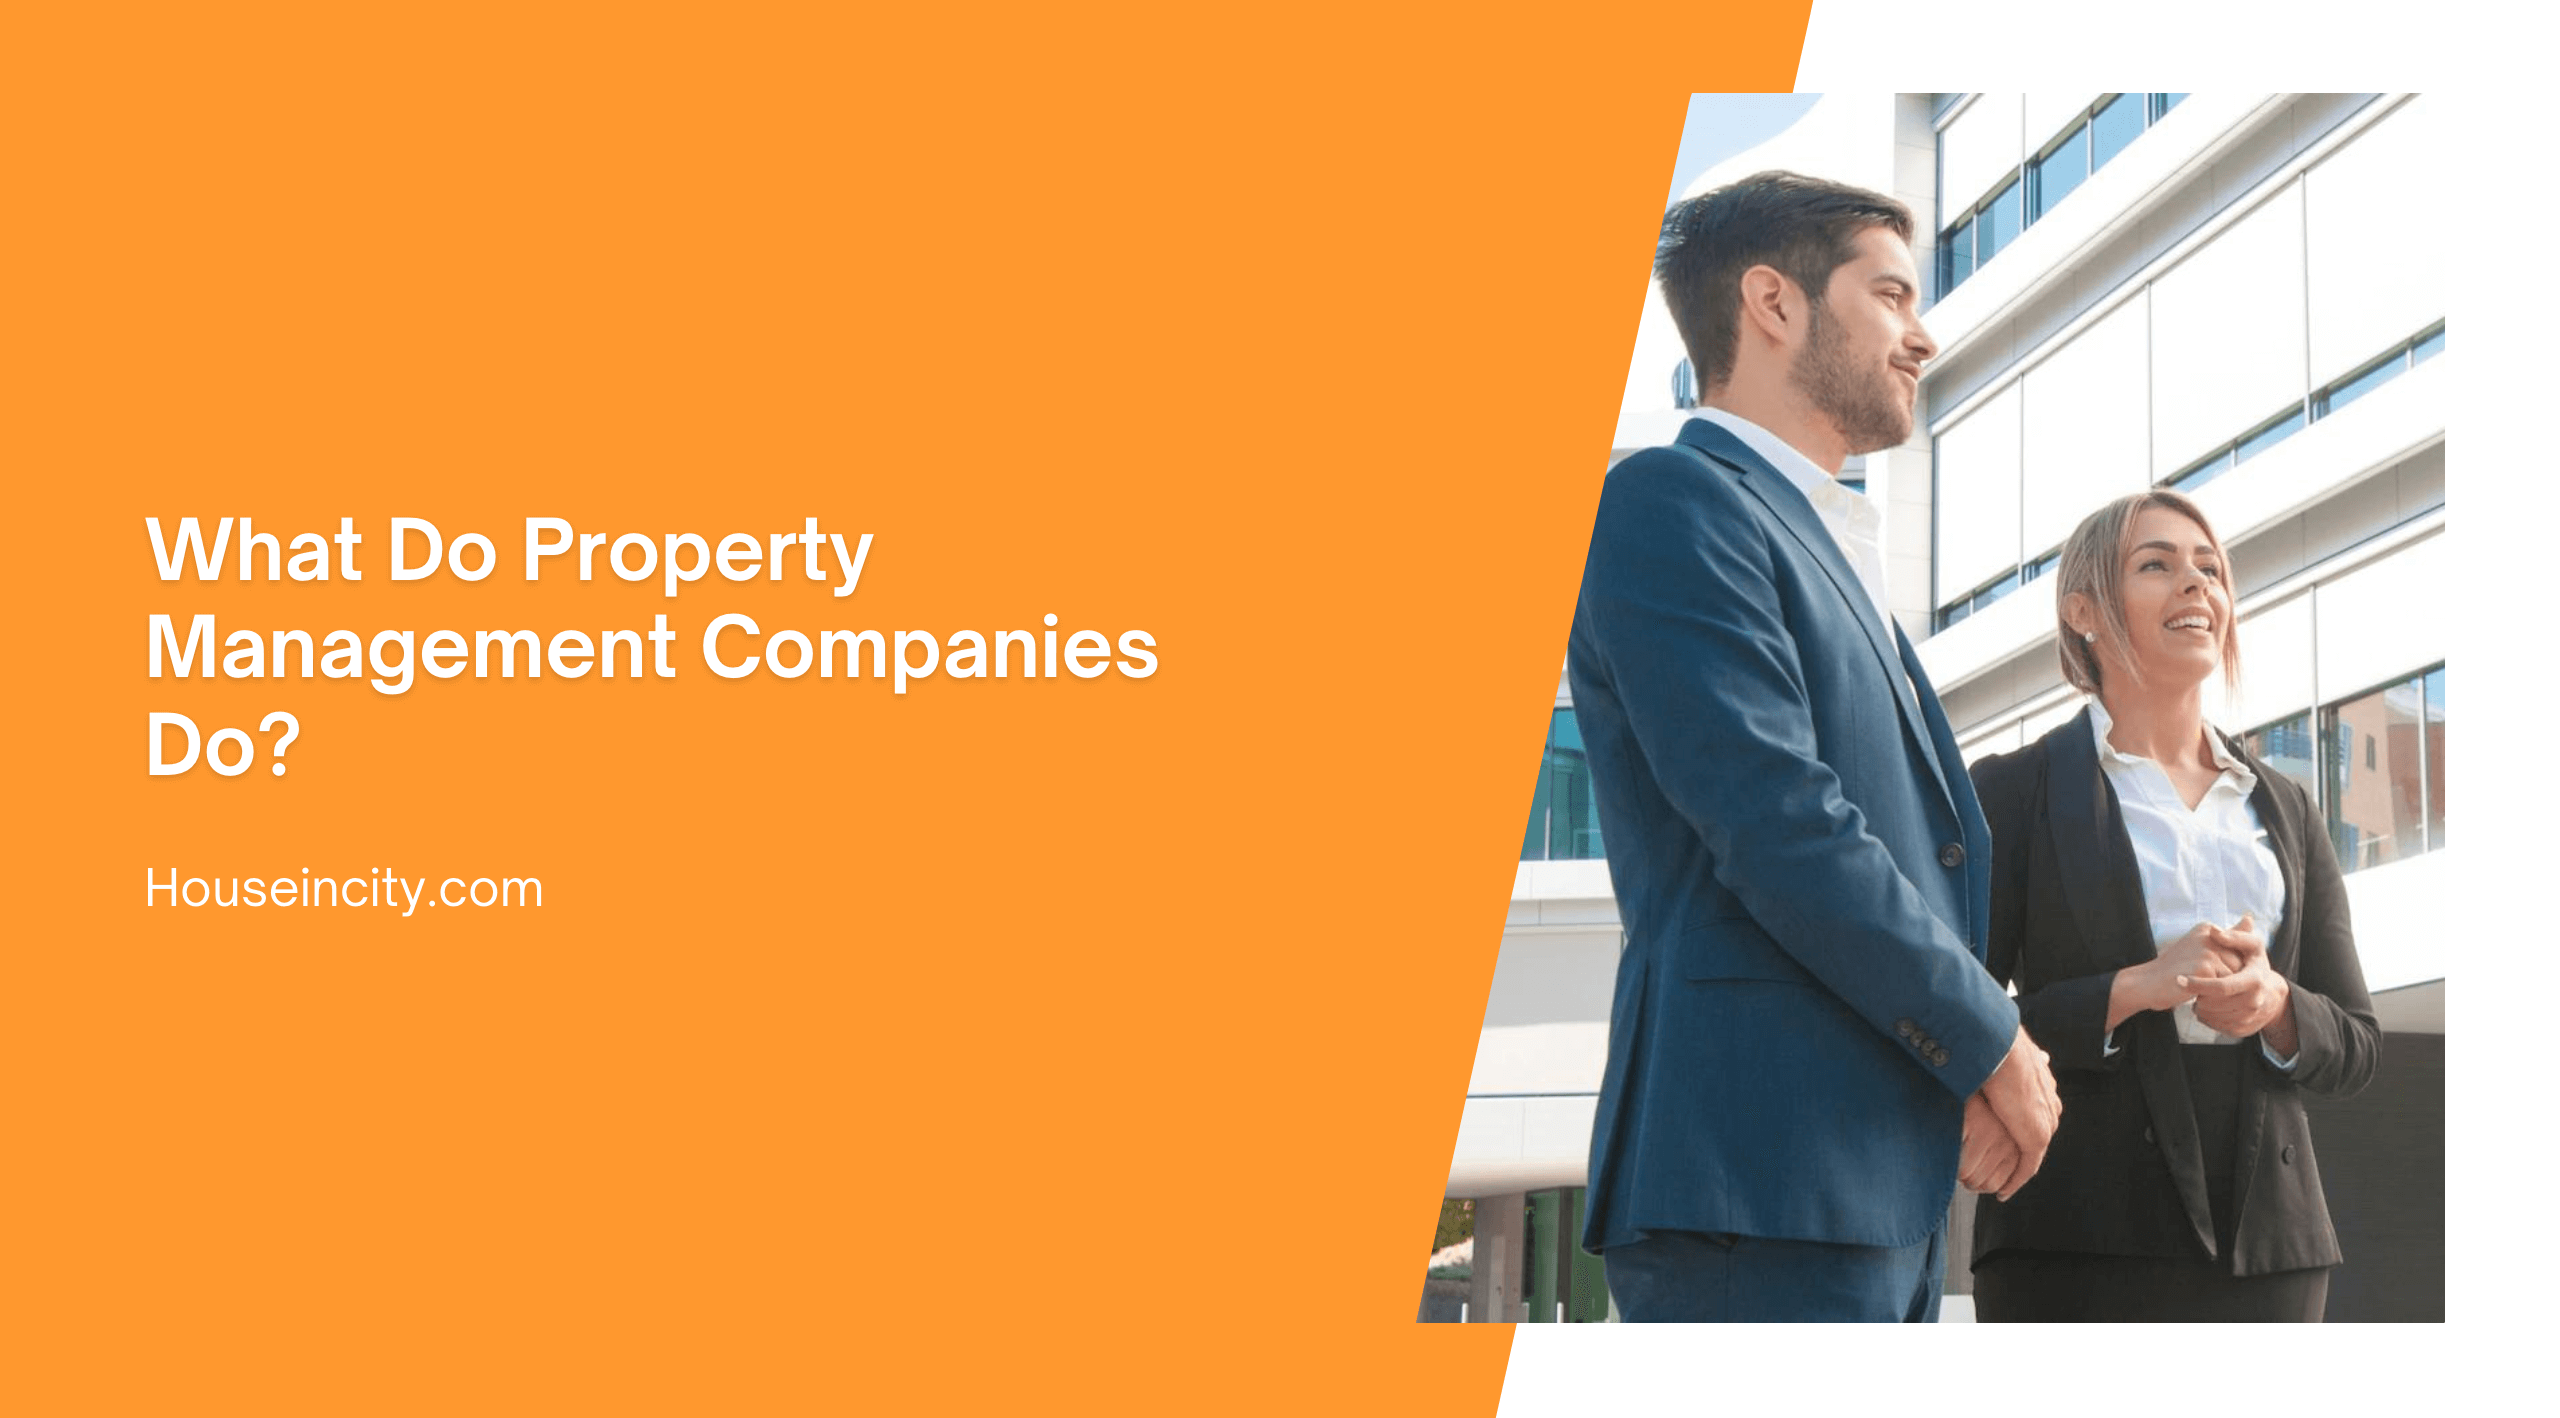 What Do Property Management Companies Do?